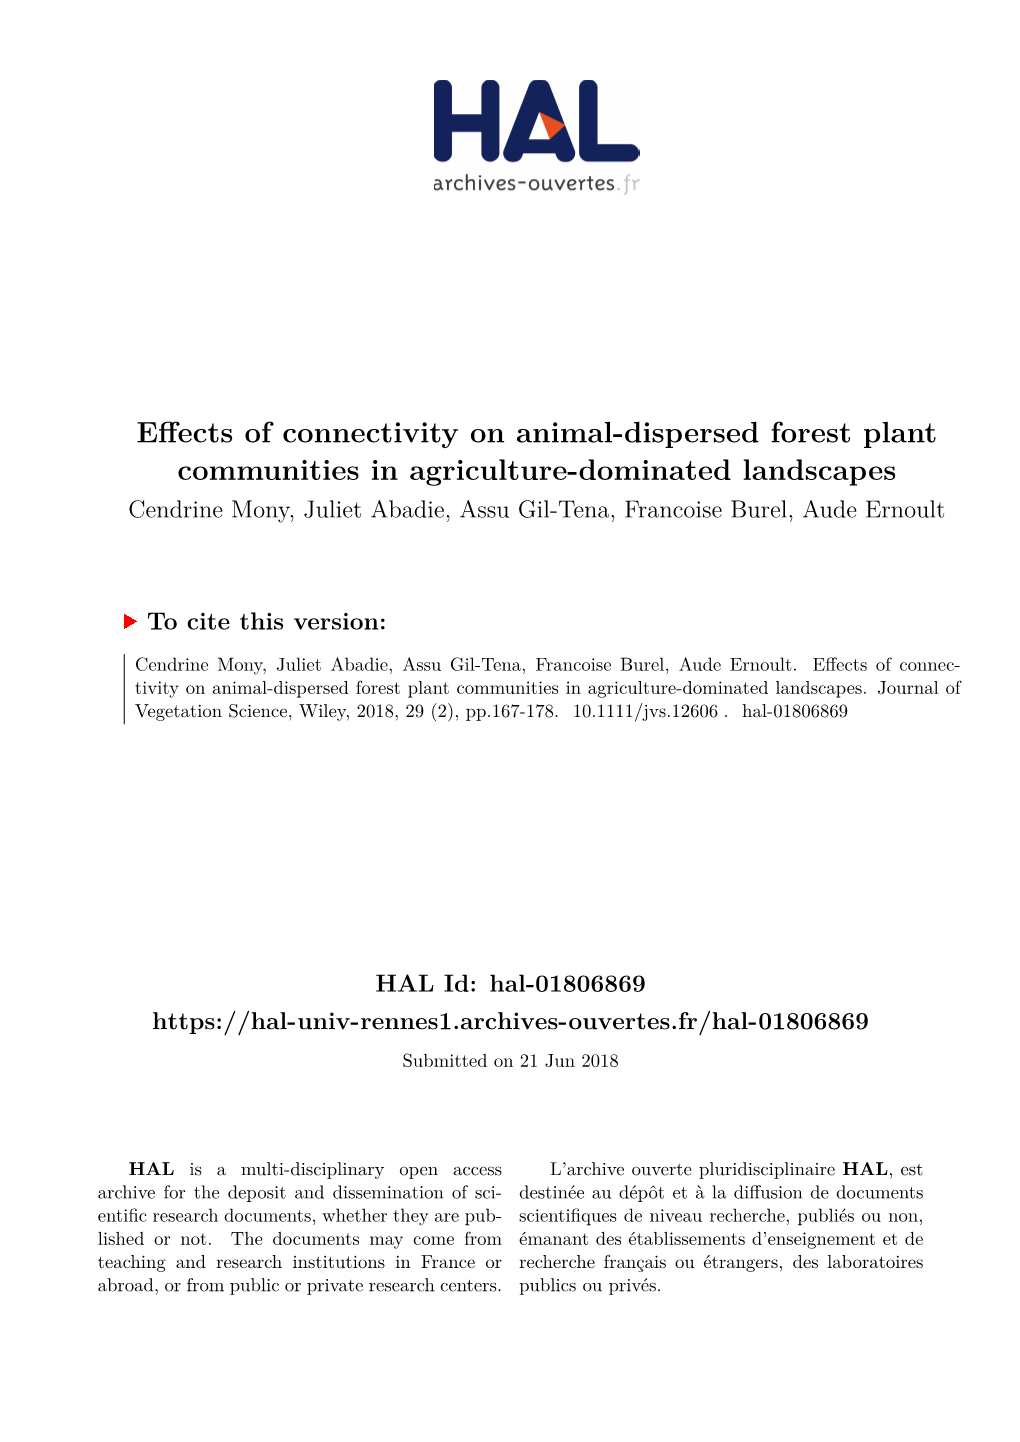 Effects of Connectivity on Animal-Dispersed Forest Plant